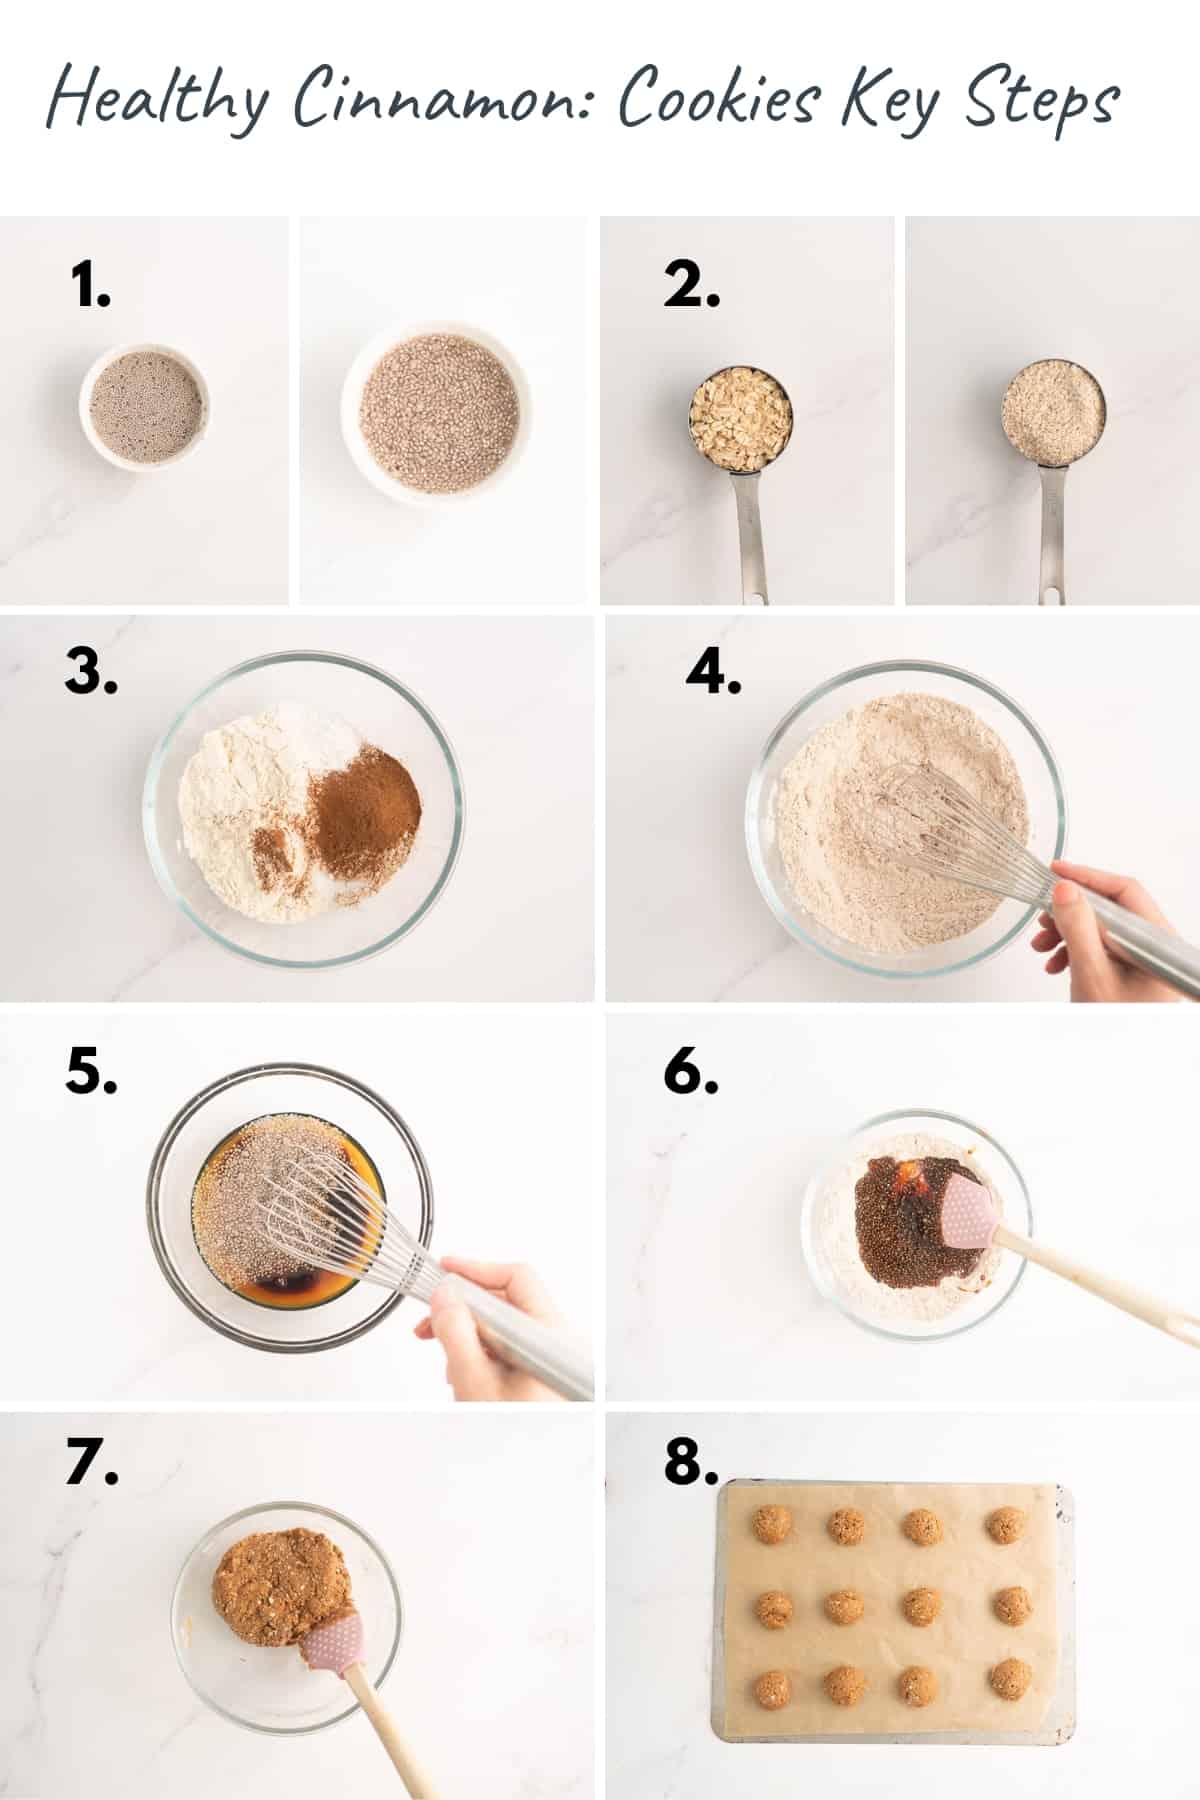 8 photo collage showing the key steps to making healthy cinnamon cookies.